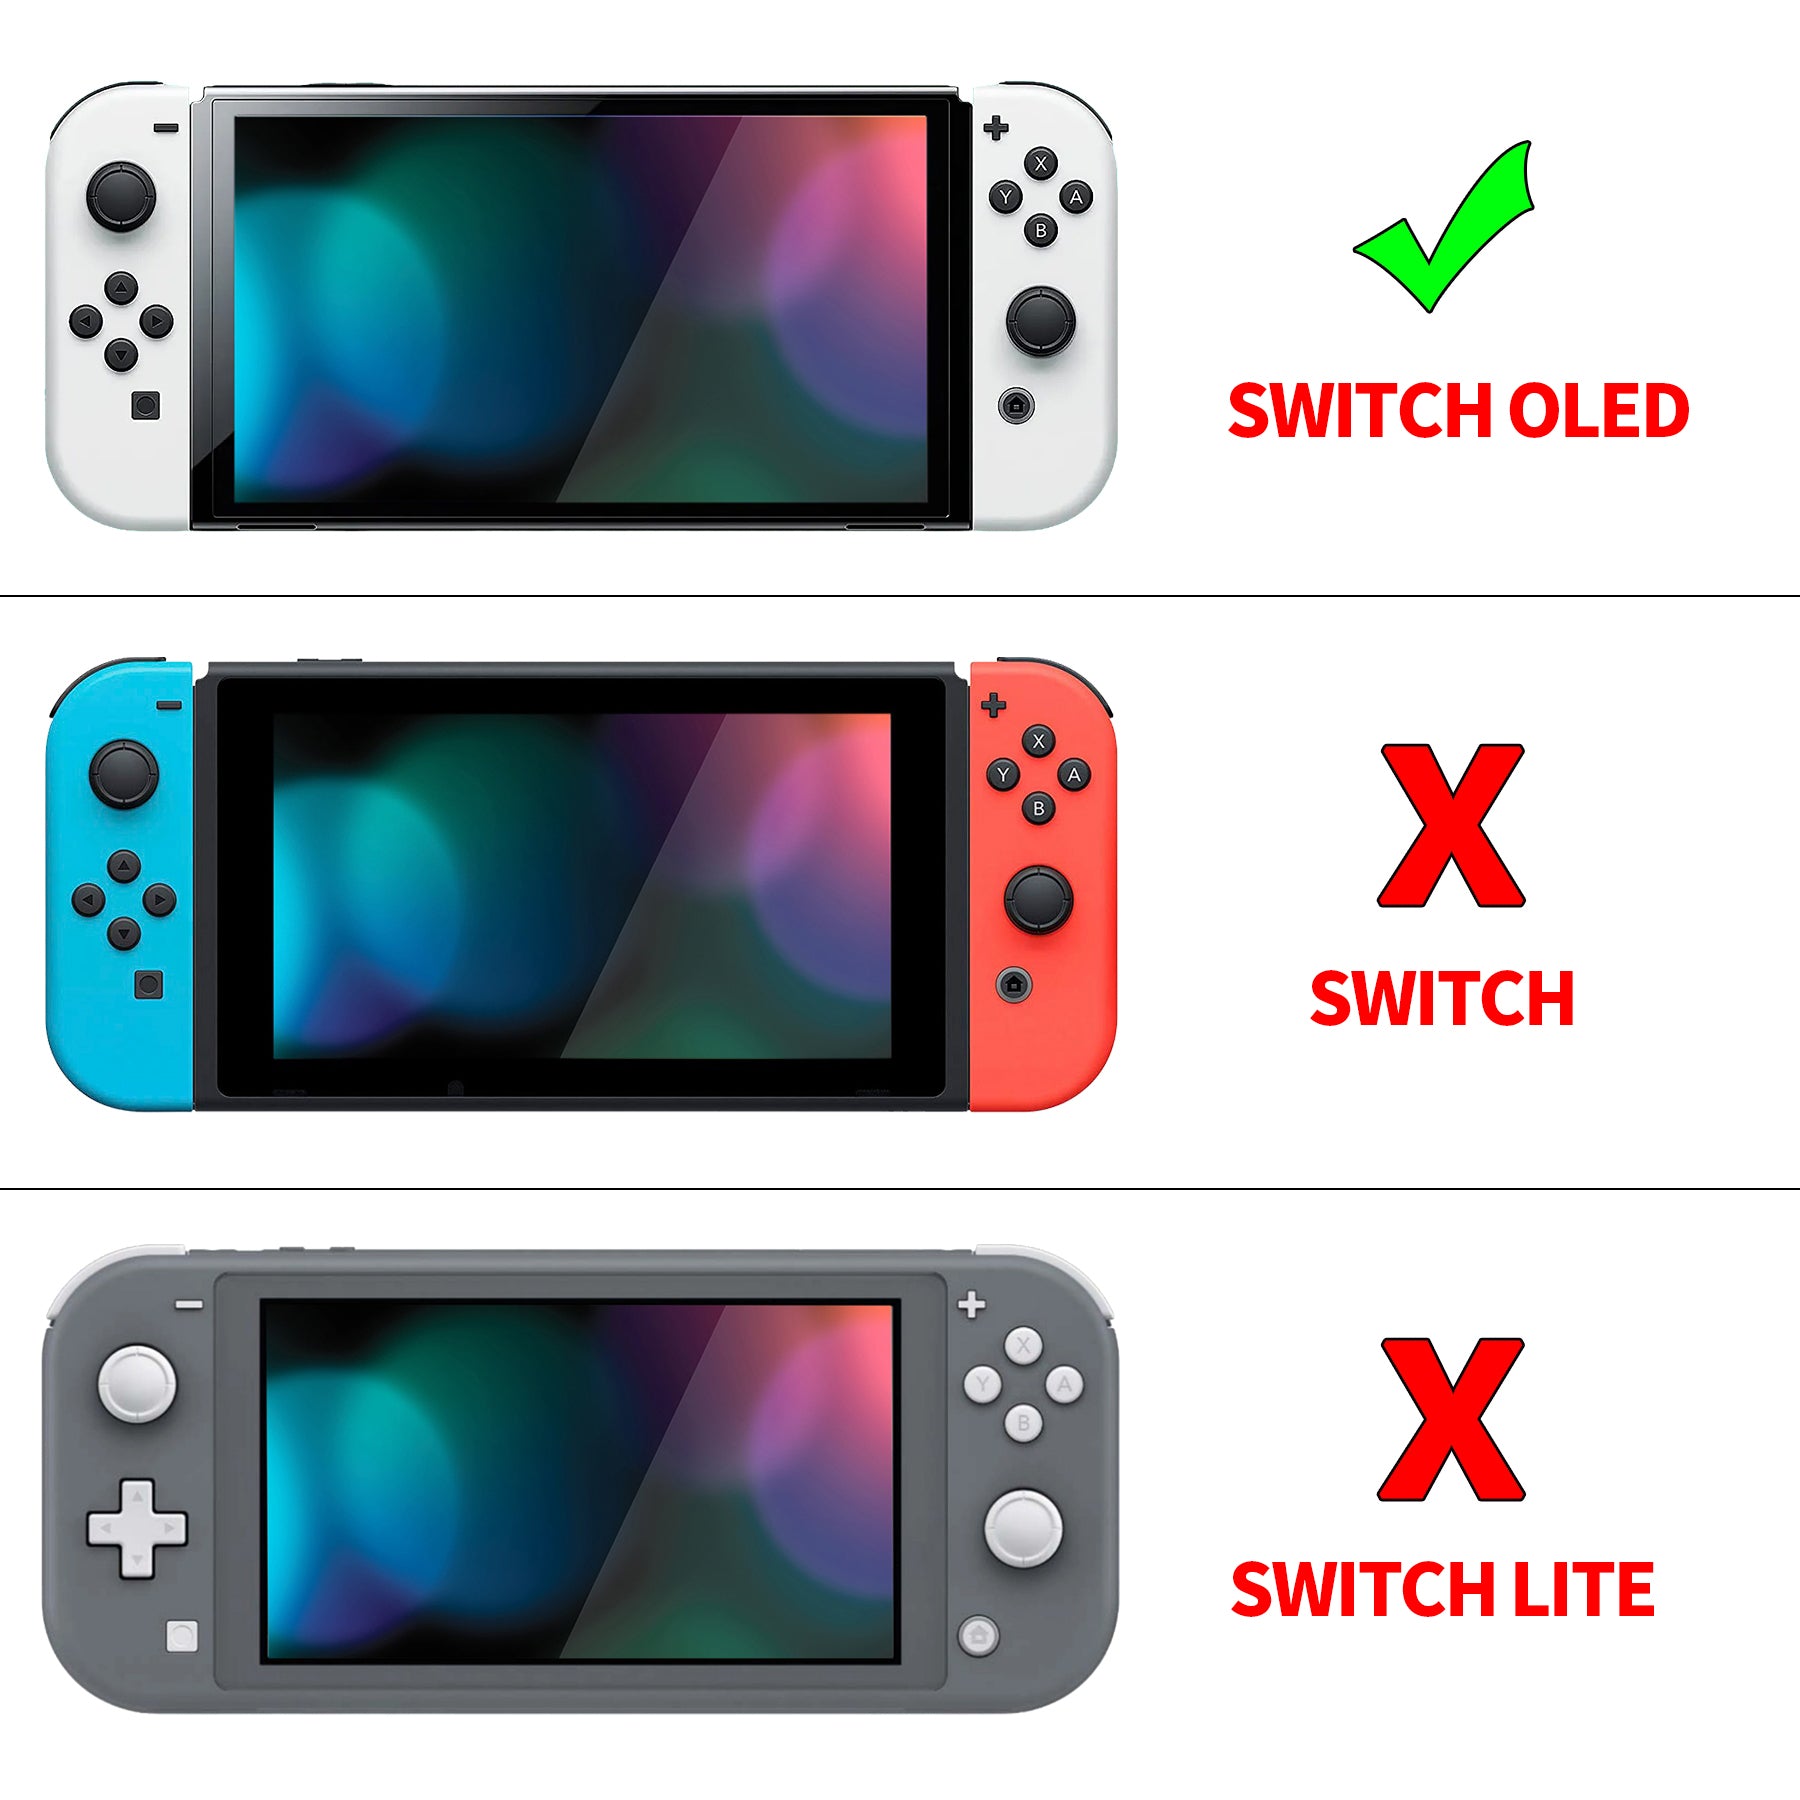 PlayVital ZealProtect Soft Protective Case for Switch OLED, Flexible Protector Joycon Grip Cover for Switch OLED with Thumb Grip Caps & ABXY Direction Button Caps - Whale in Dream - XSOYV6025 playvital